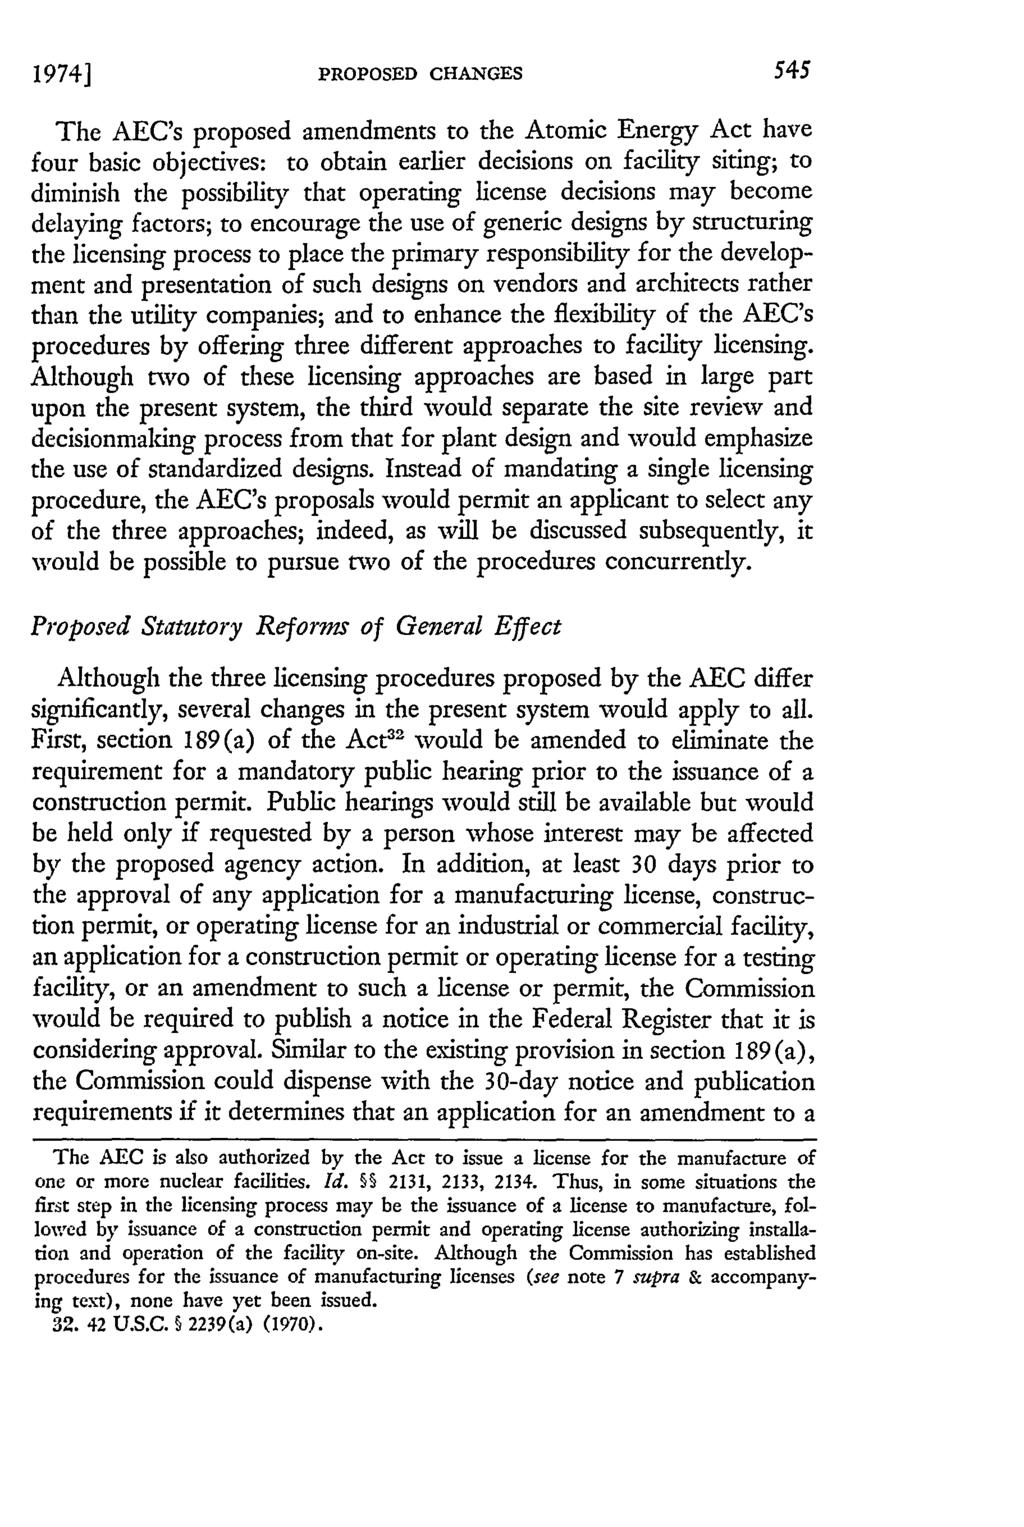 1974] PROPOSED CHANGES The AEC's proposed amendments to the Atomic Energy Act have four basic objectives: to obtain earlier decisions on facility siting; to diminish the possibility that operating